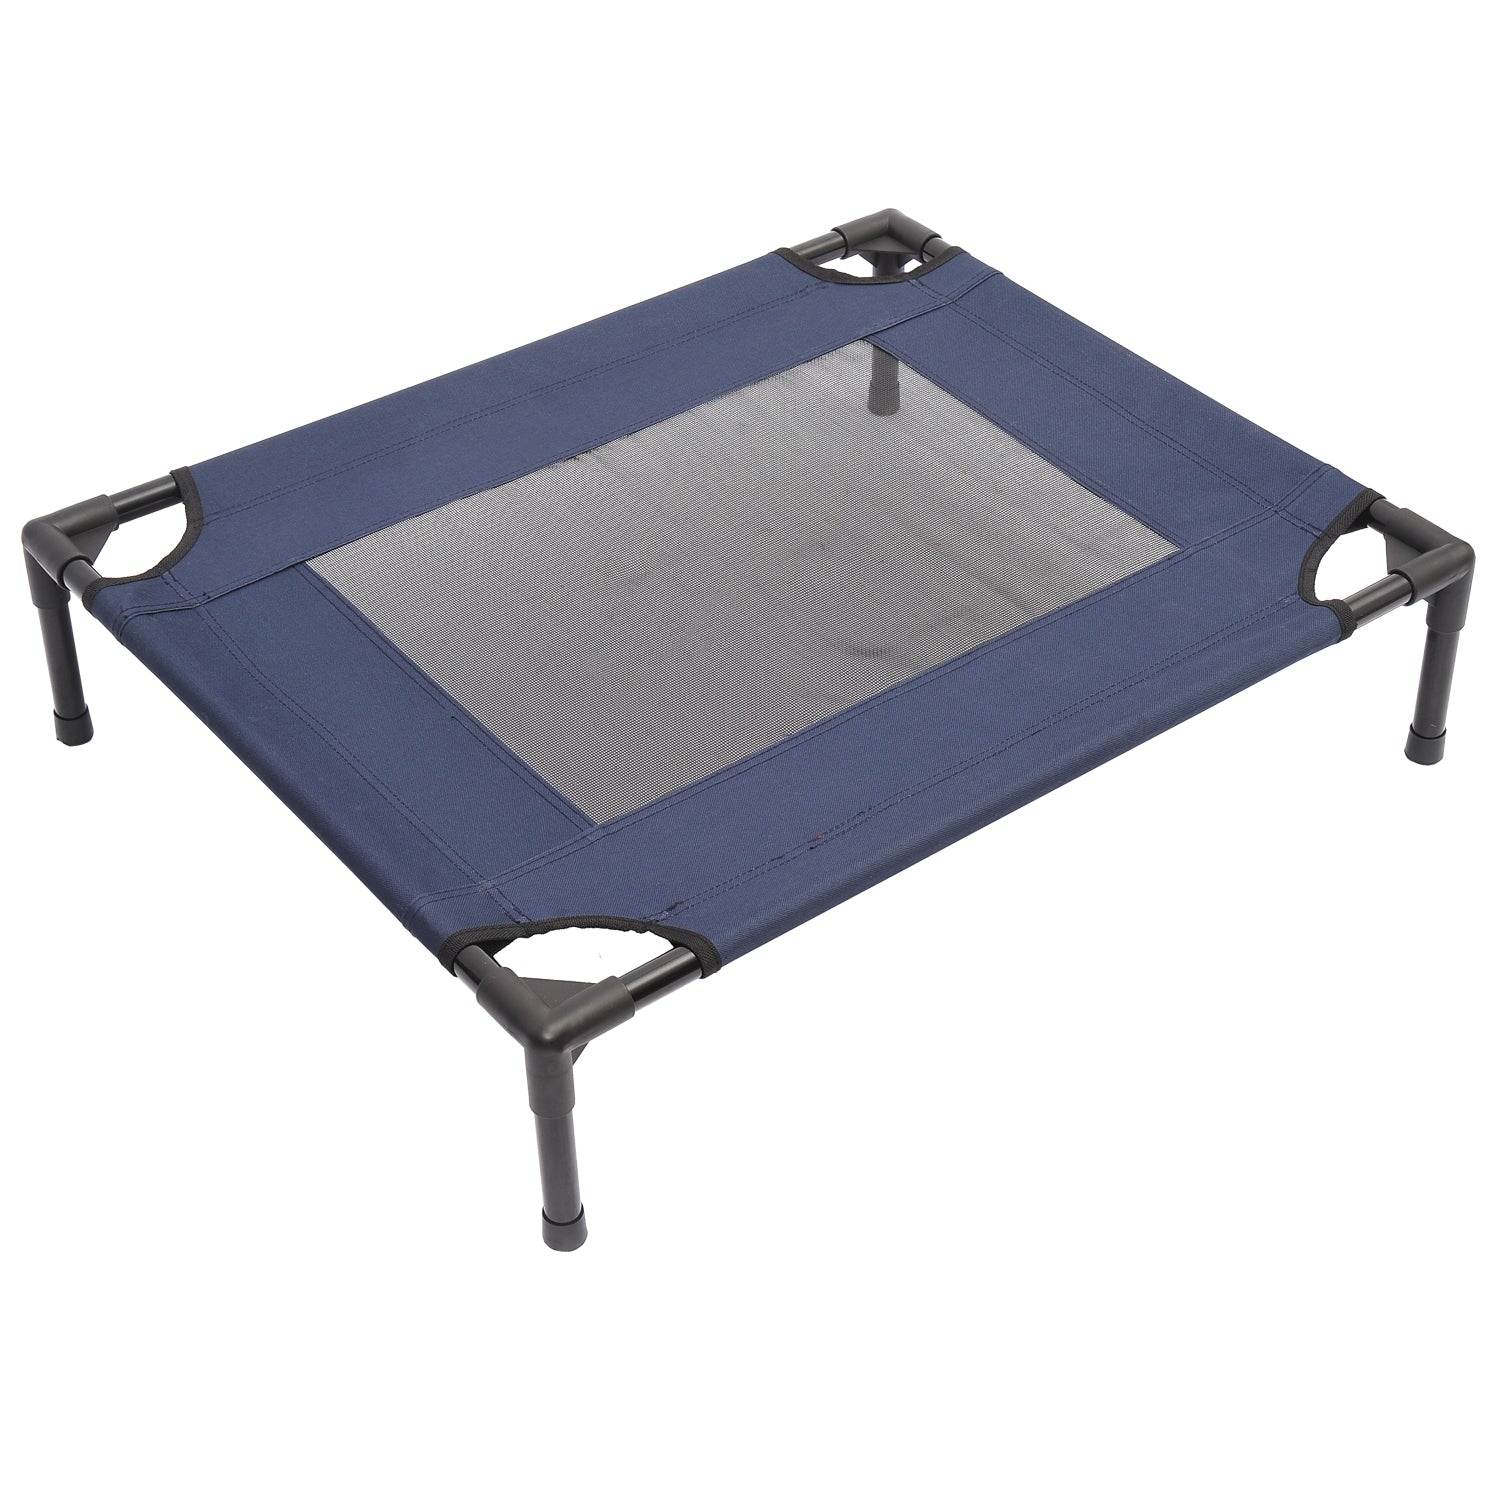 Portable Pets Elevated Raised Cot Bed-Blue